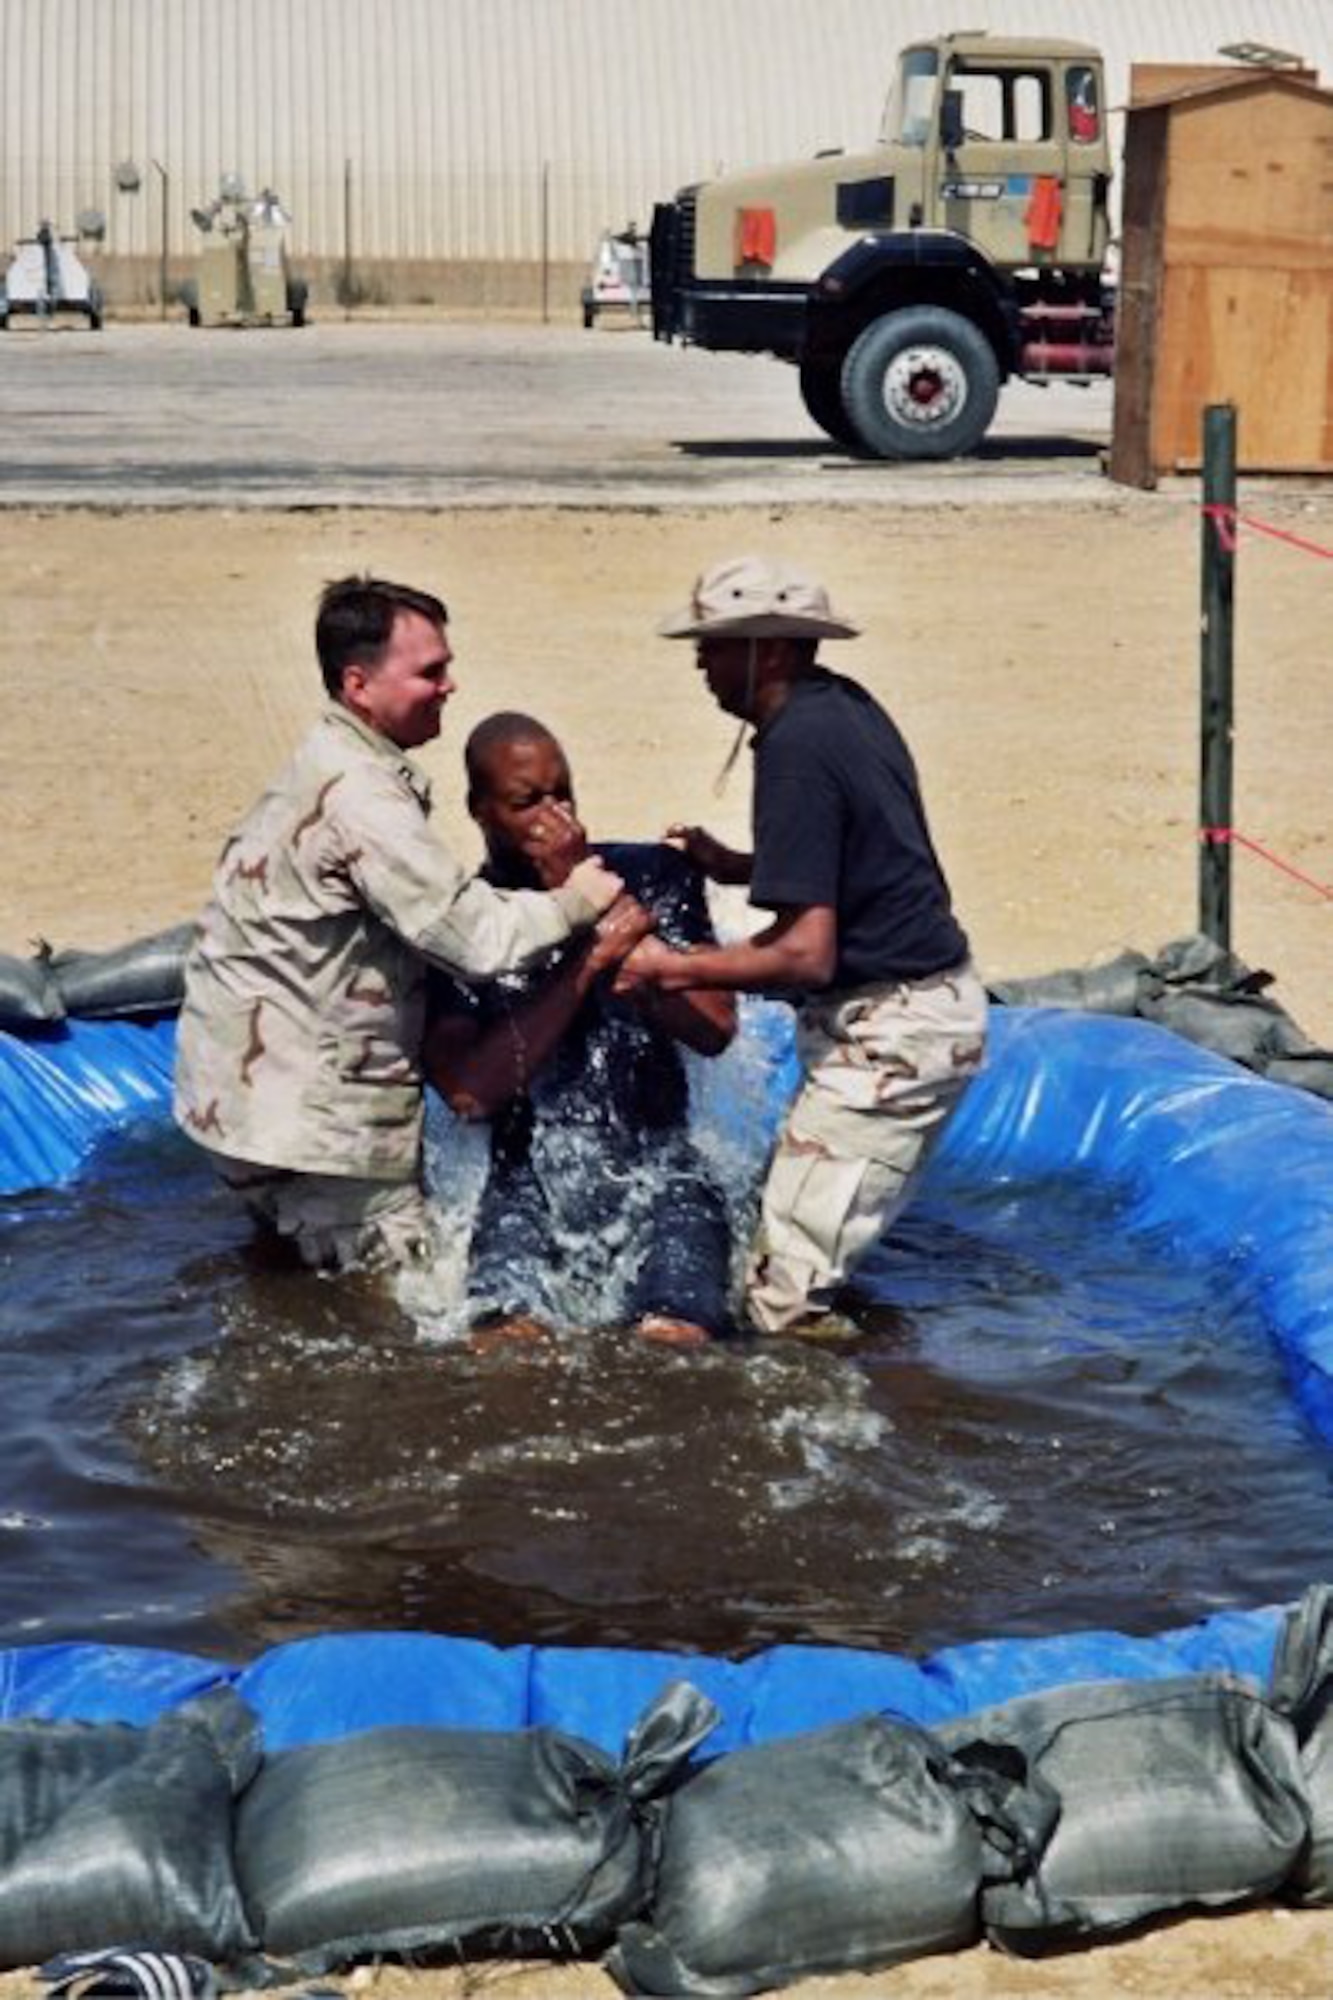 (Then) Capt. Matthew Boyd (left) baptizes a service member during a deployment to the Middle East in 2009. Now a major, Boyd continues his long lineage of serving in the military as a chaplain offering guidance and contentment for those in need. (Courtesy photo)